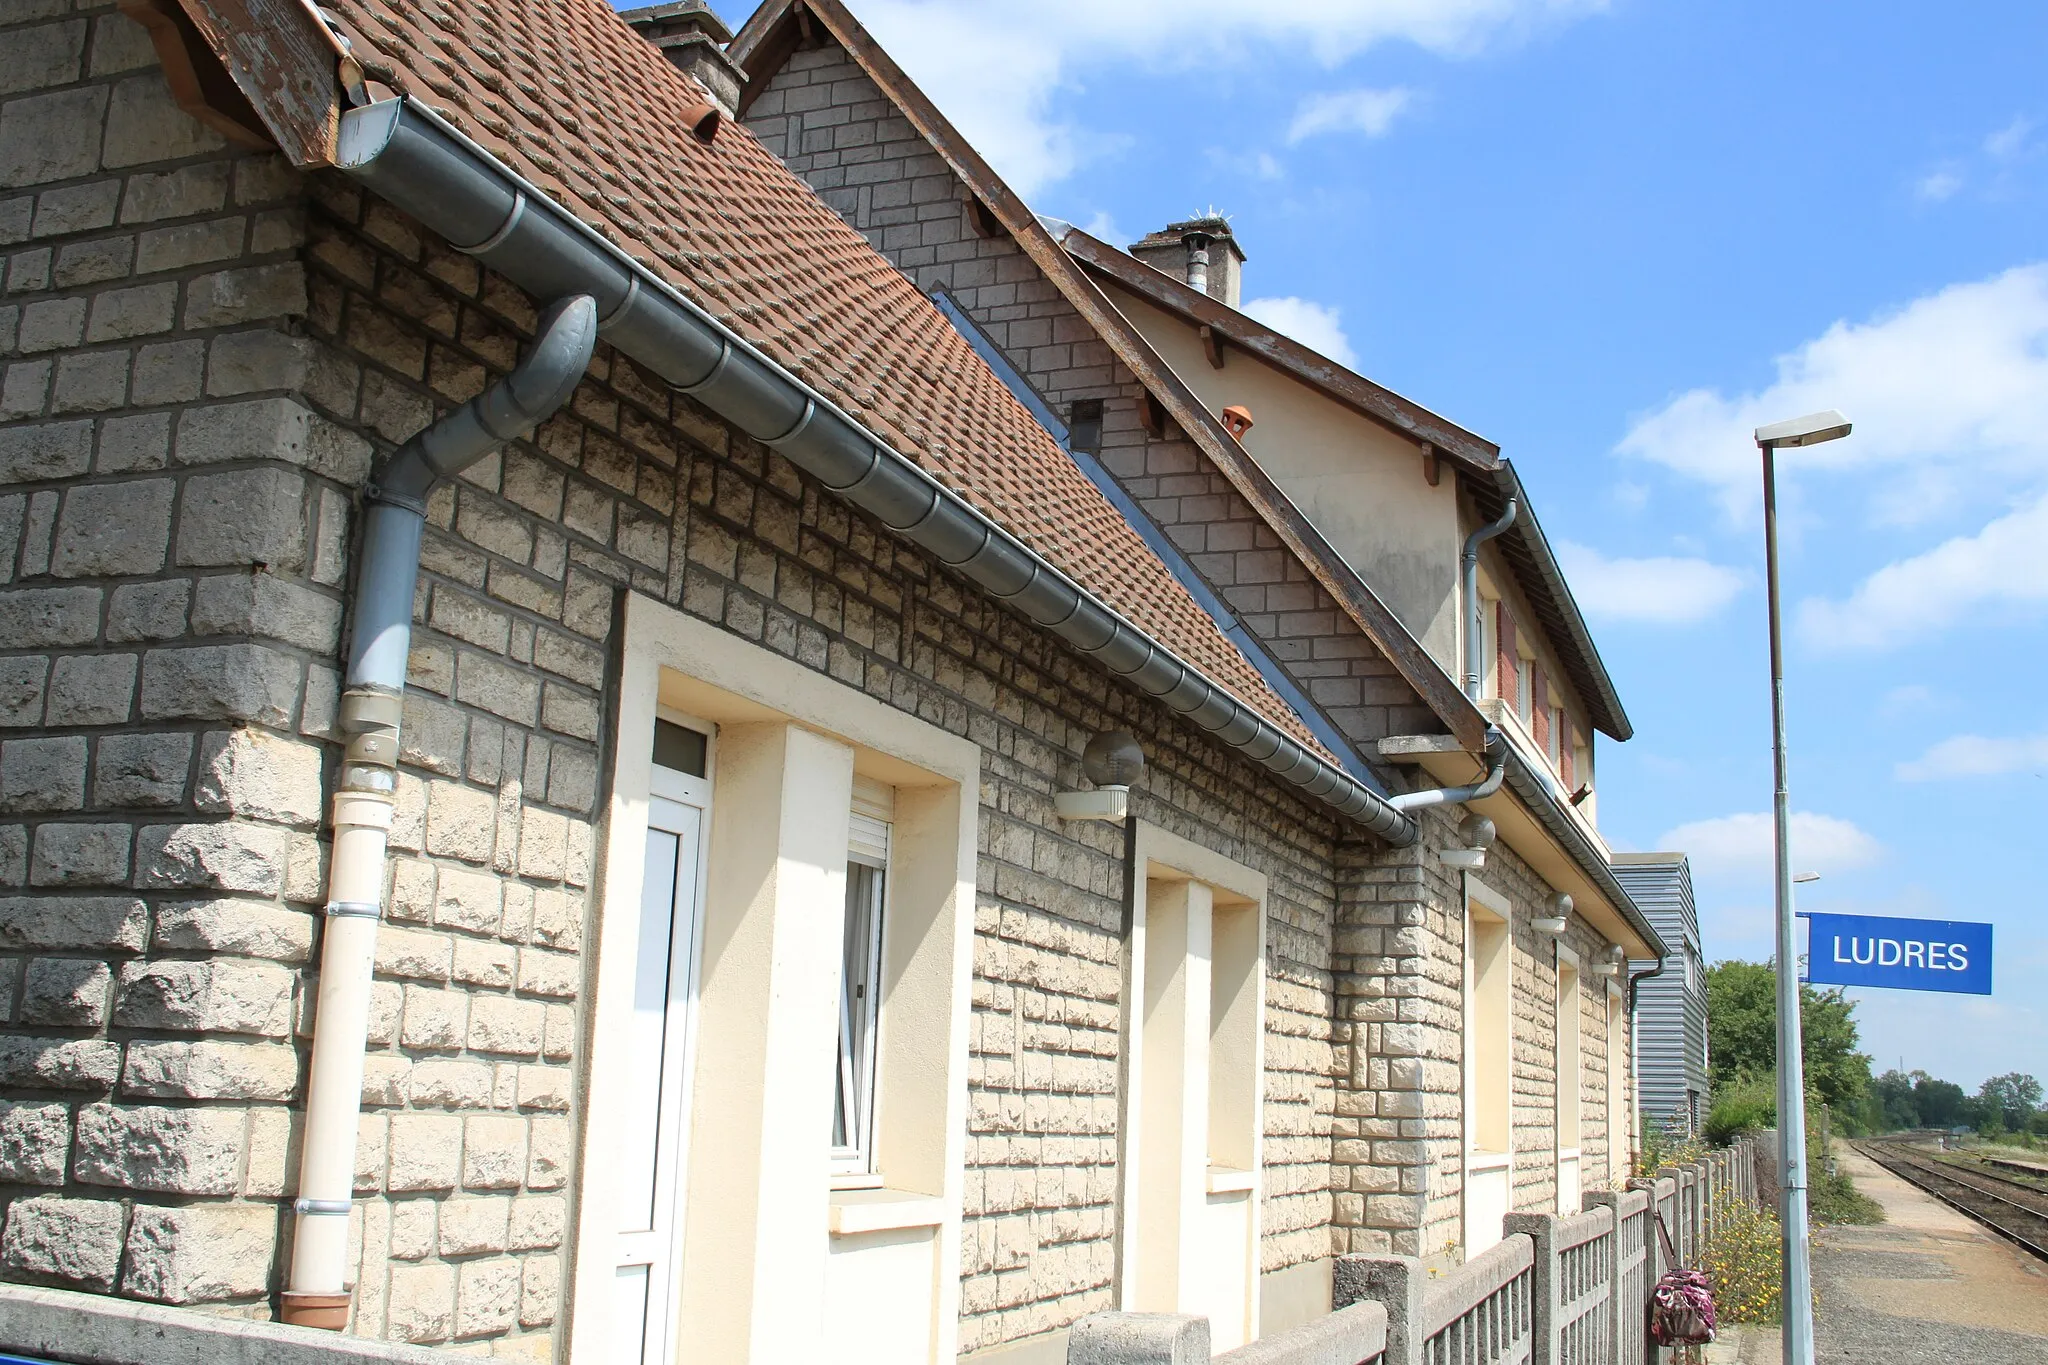 Photo showing: Ludres Train station